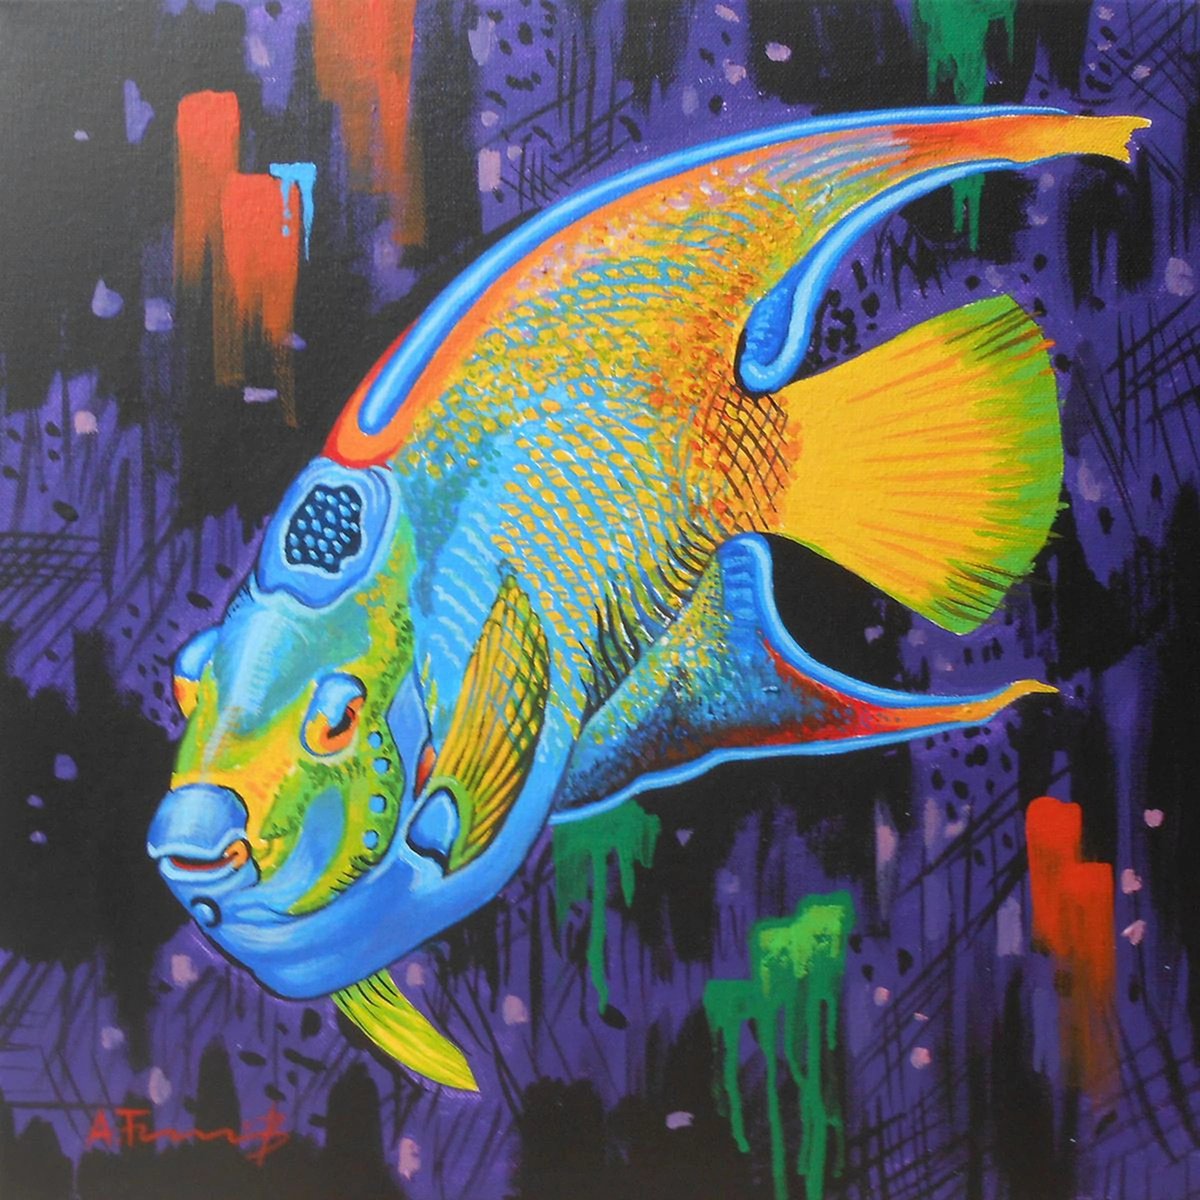 Fish on Abstract Background I by Alexander Titorenkov